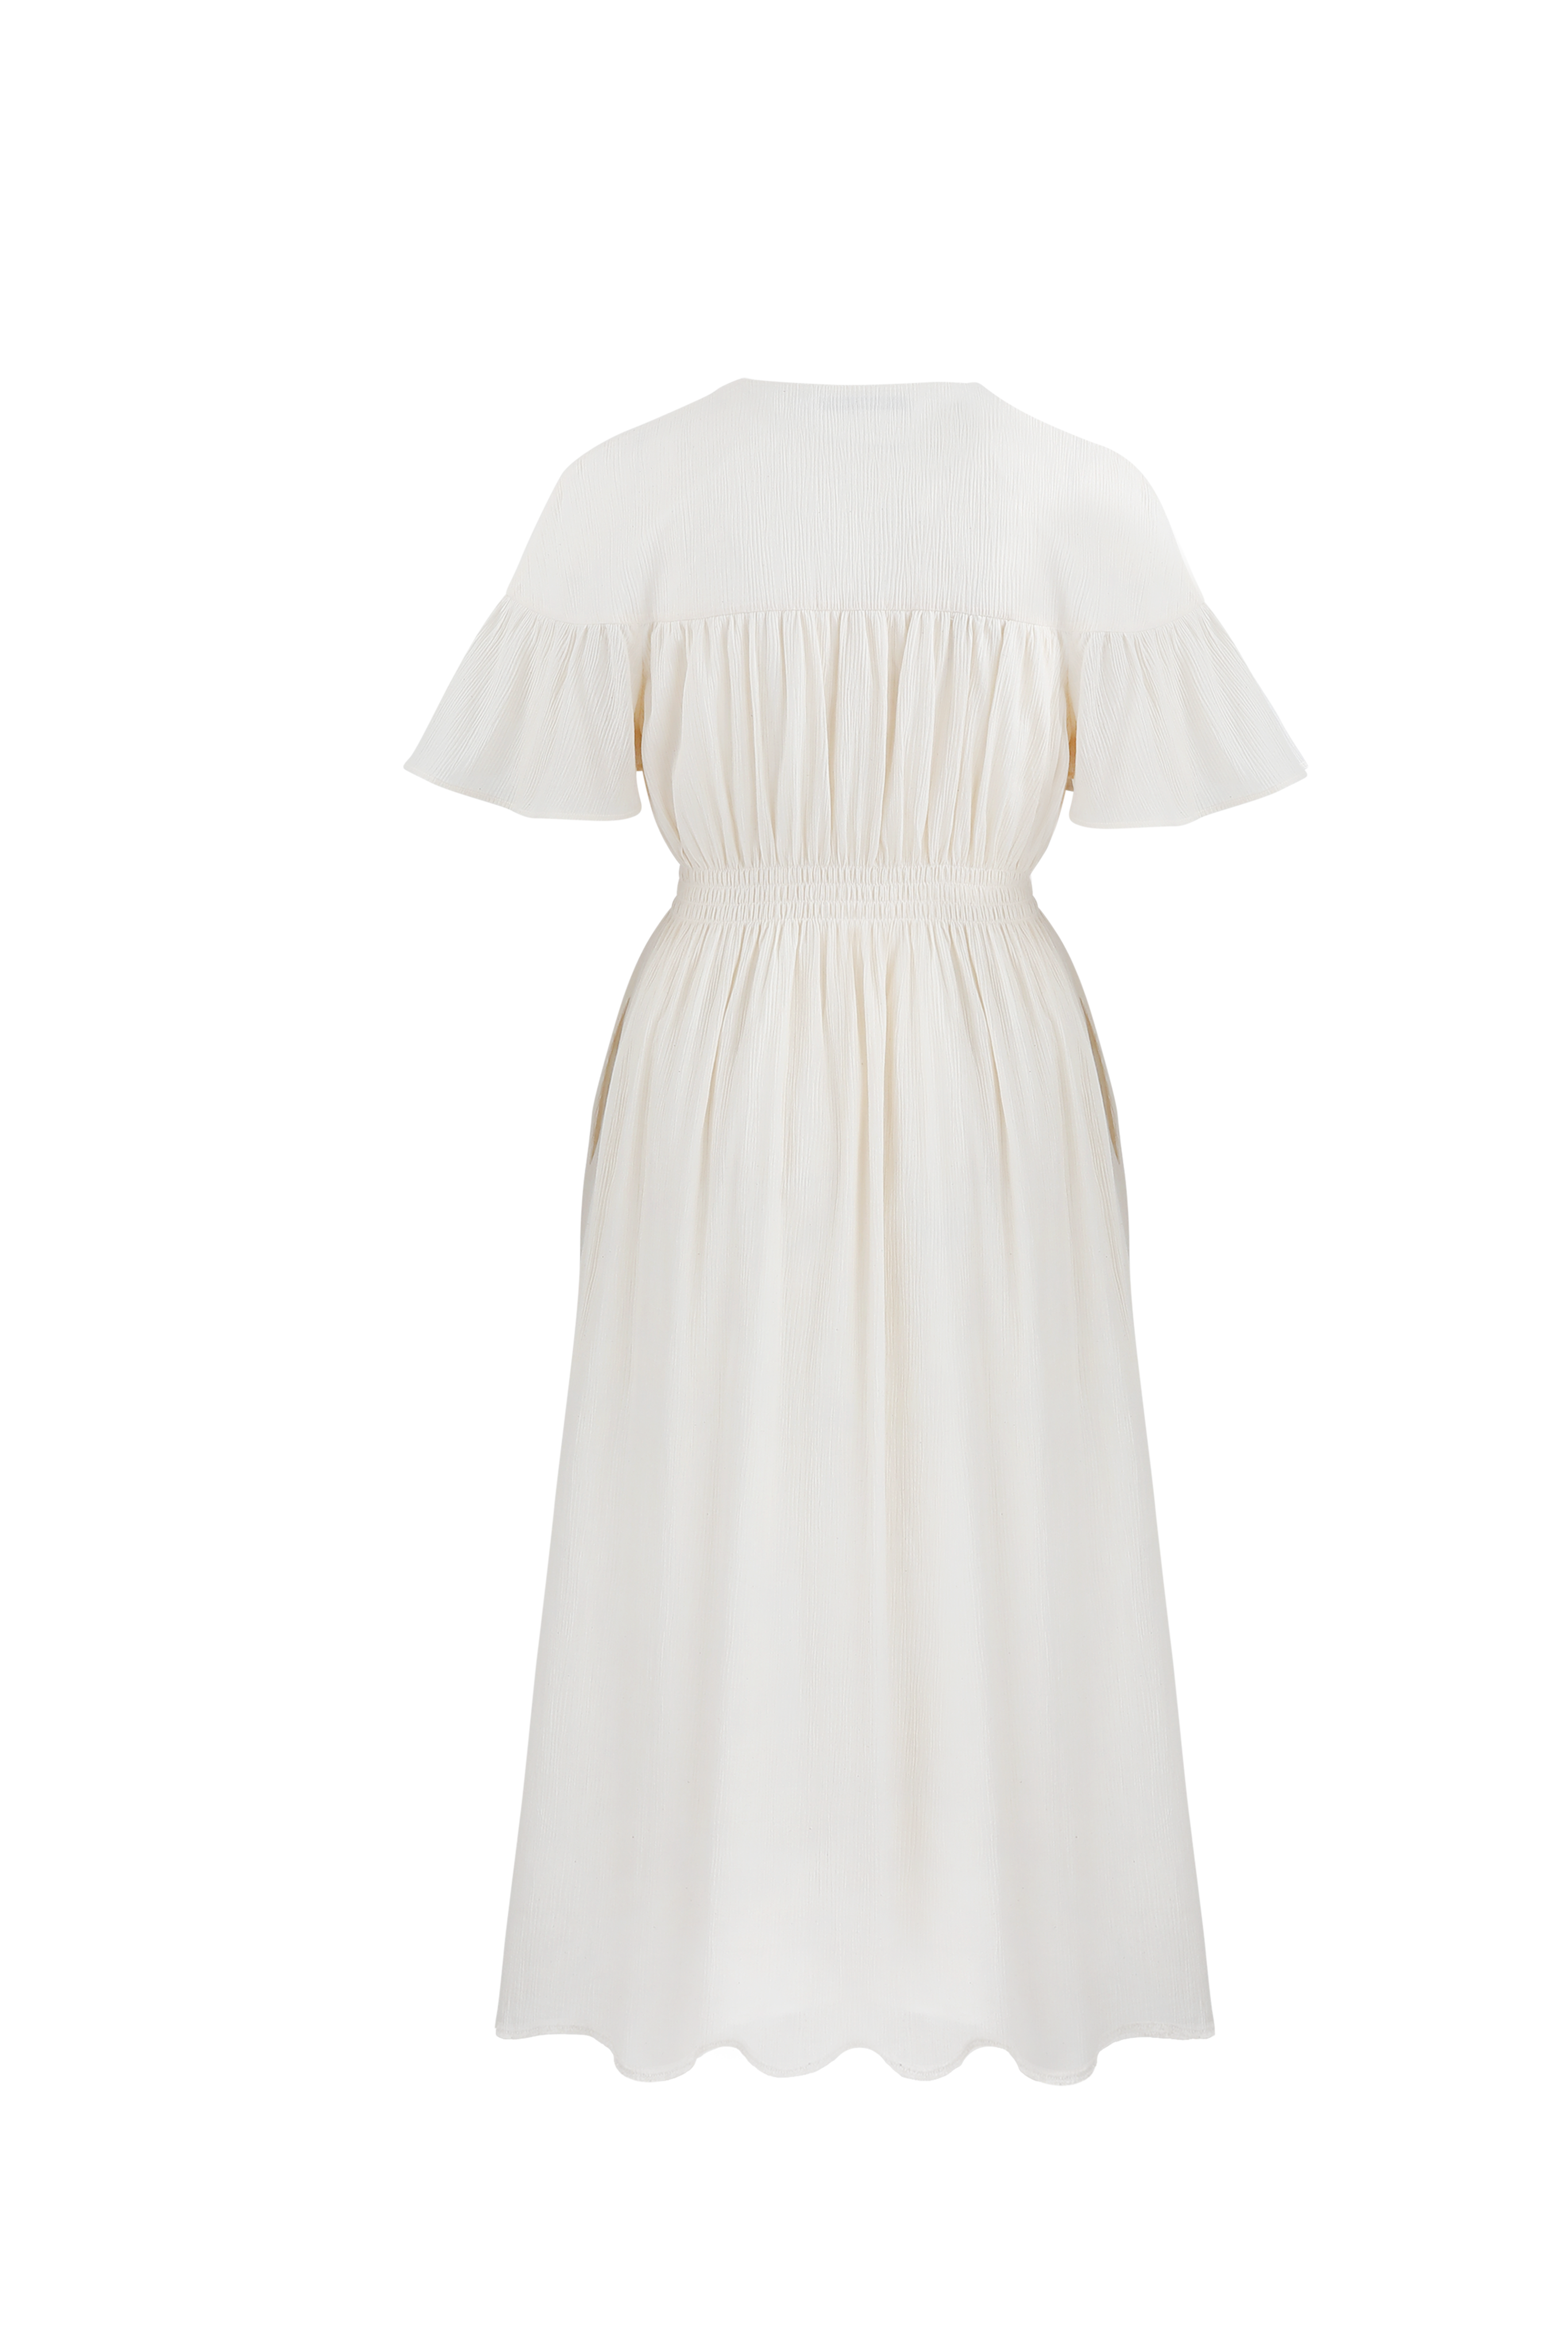 Cotton Ruched White Lucille | | Organic to Dress Hold 100% Creme Something Dress |